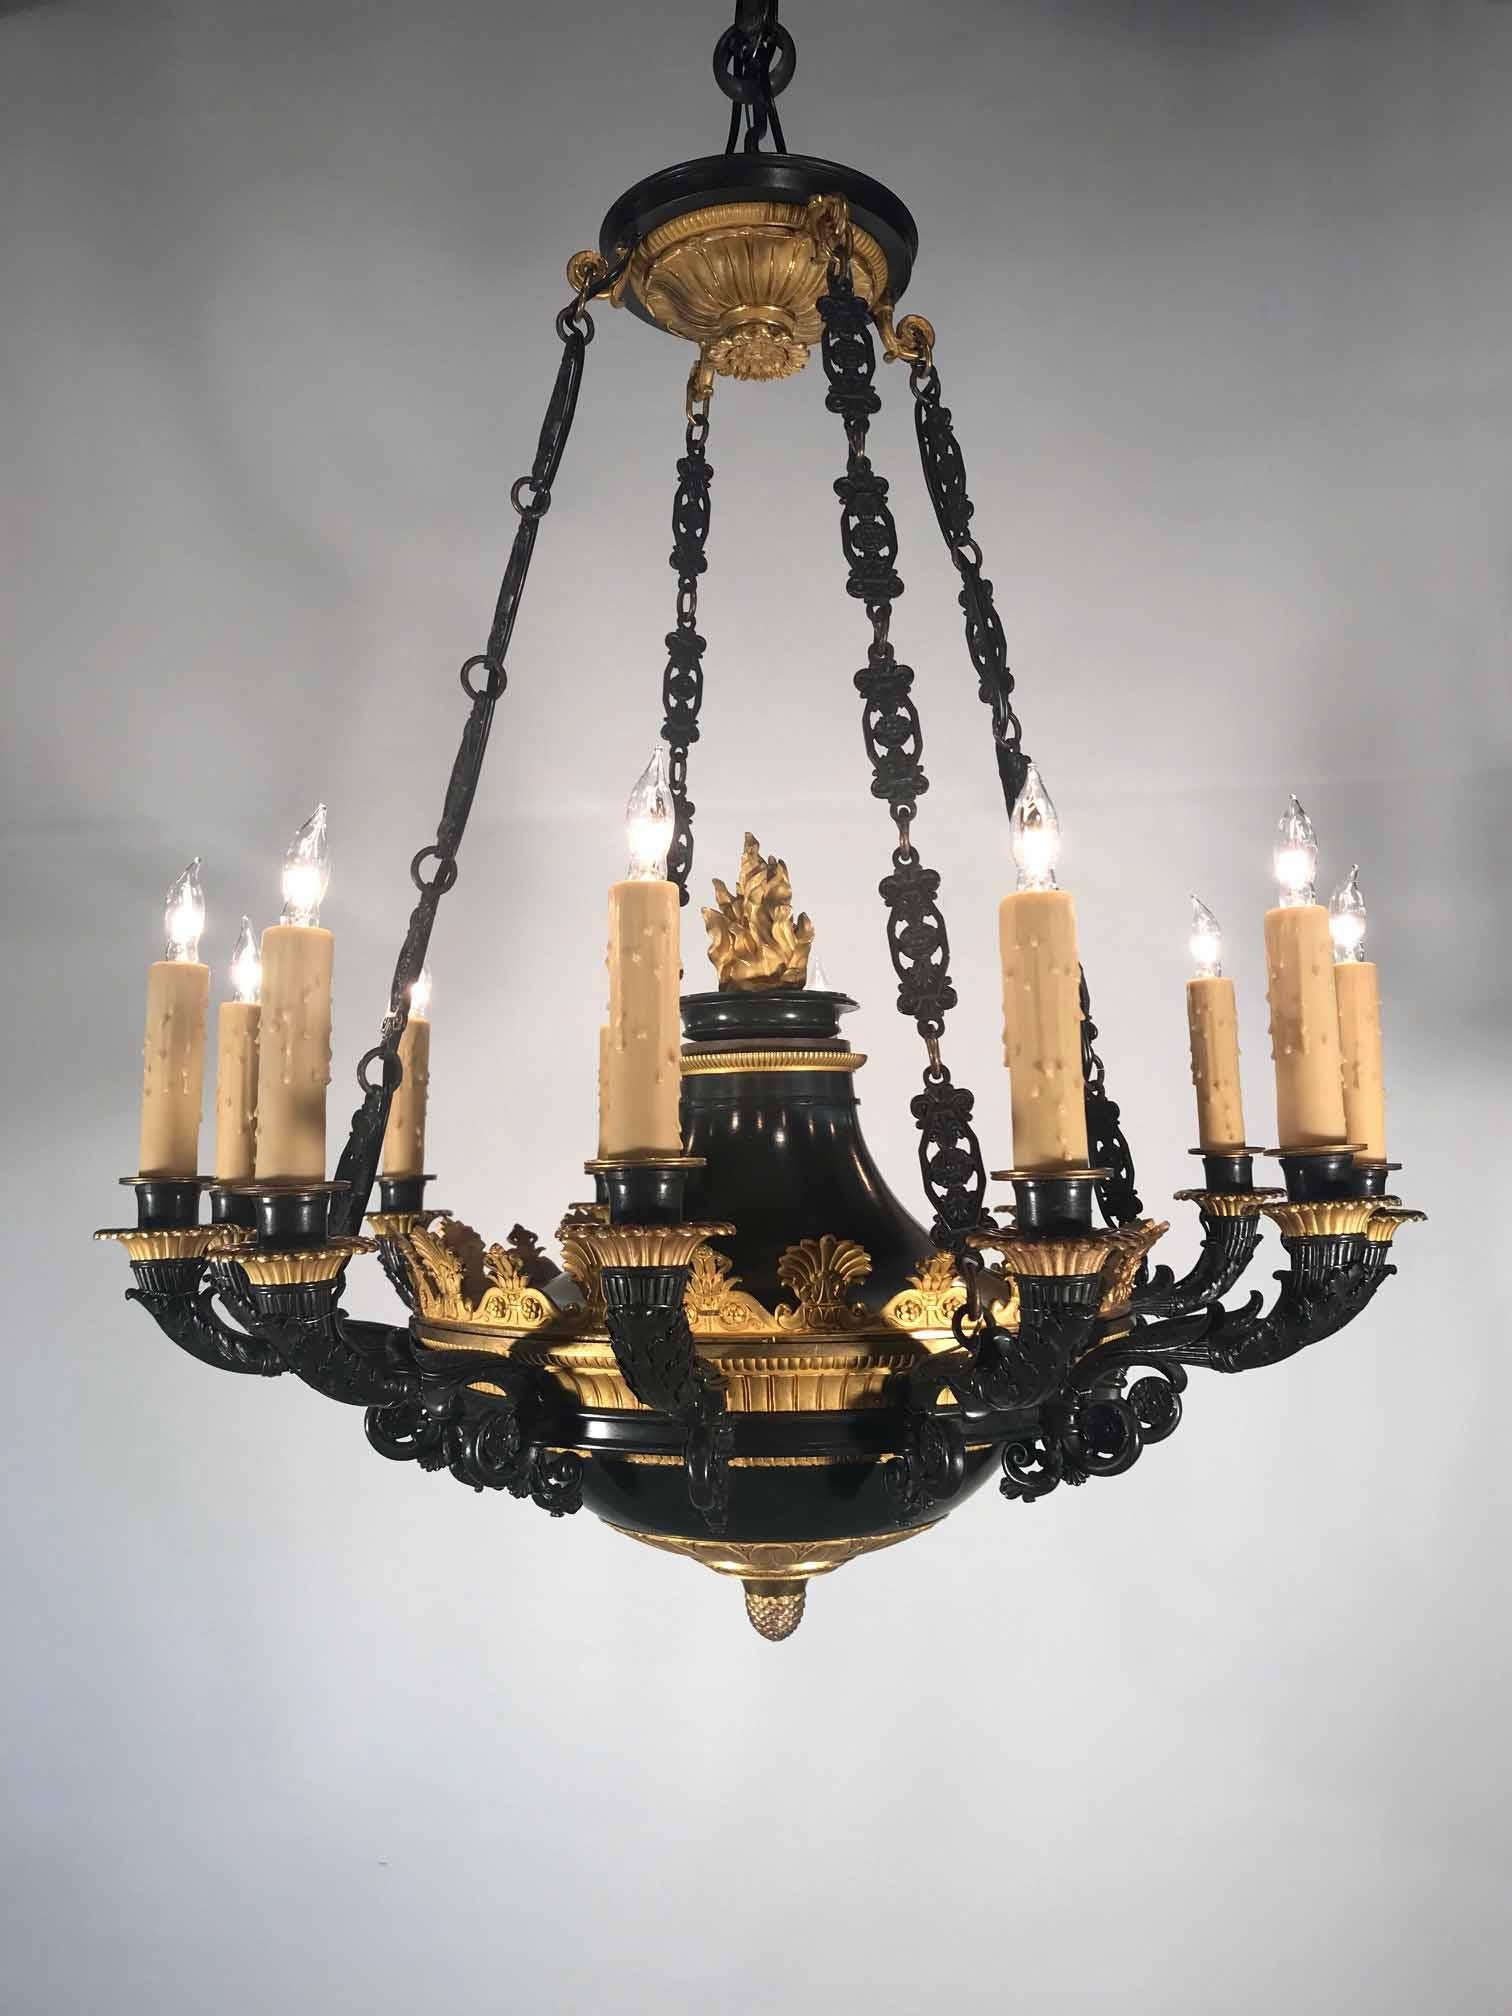 This chandelier combines an understated crisply cast dark bronze body with wonderful quality two-tone gilding. Of classical inspiration, the theme is leafy, repeating borders of anthemions and palmettes: with the canopy, flambeau central flame and